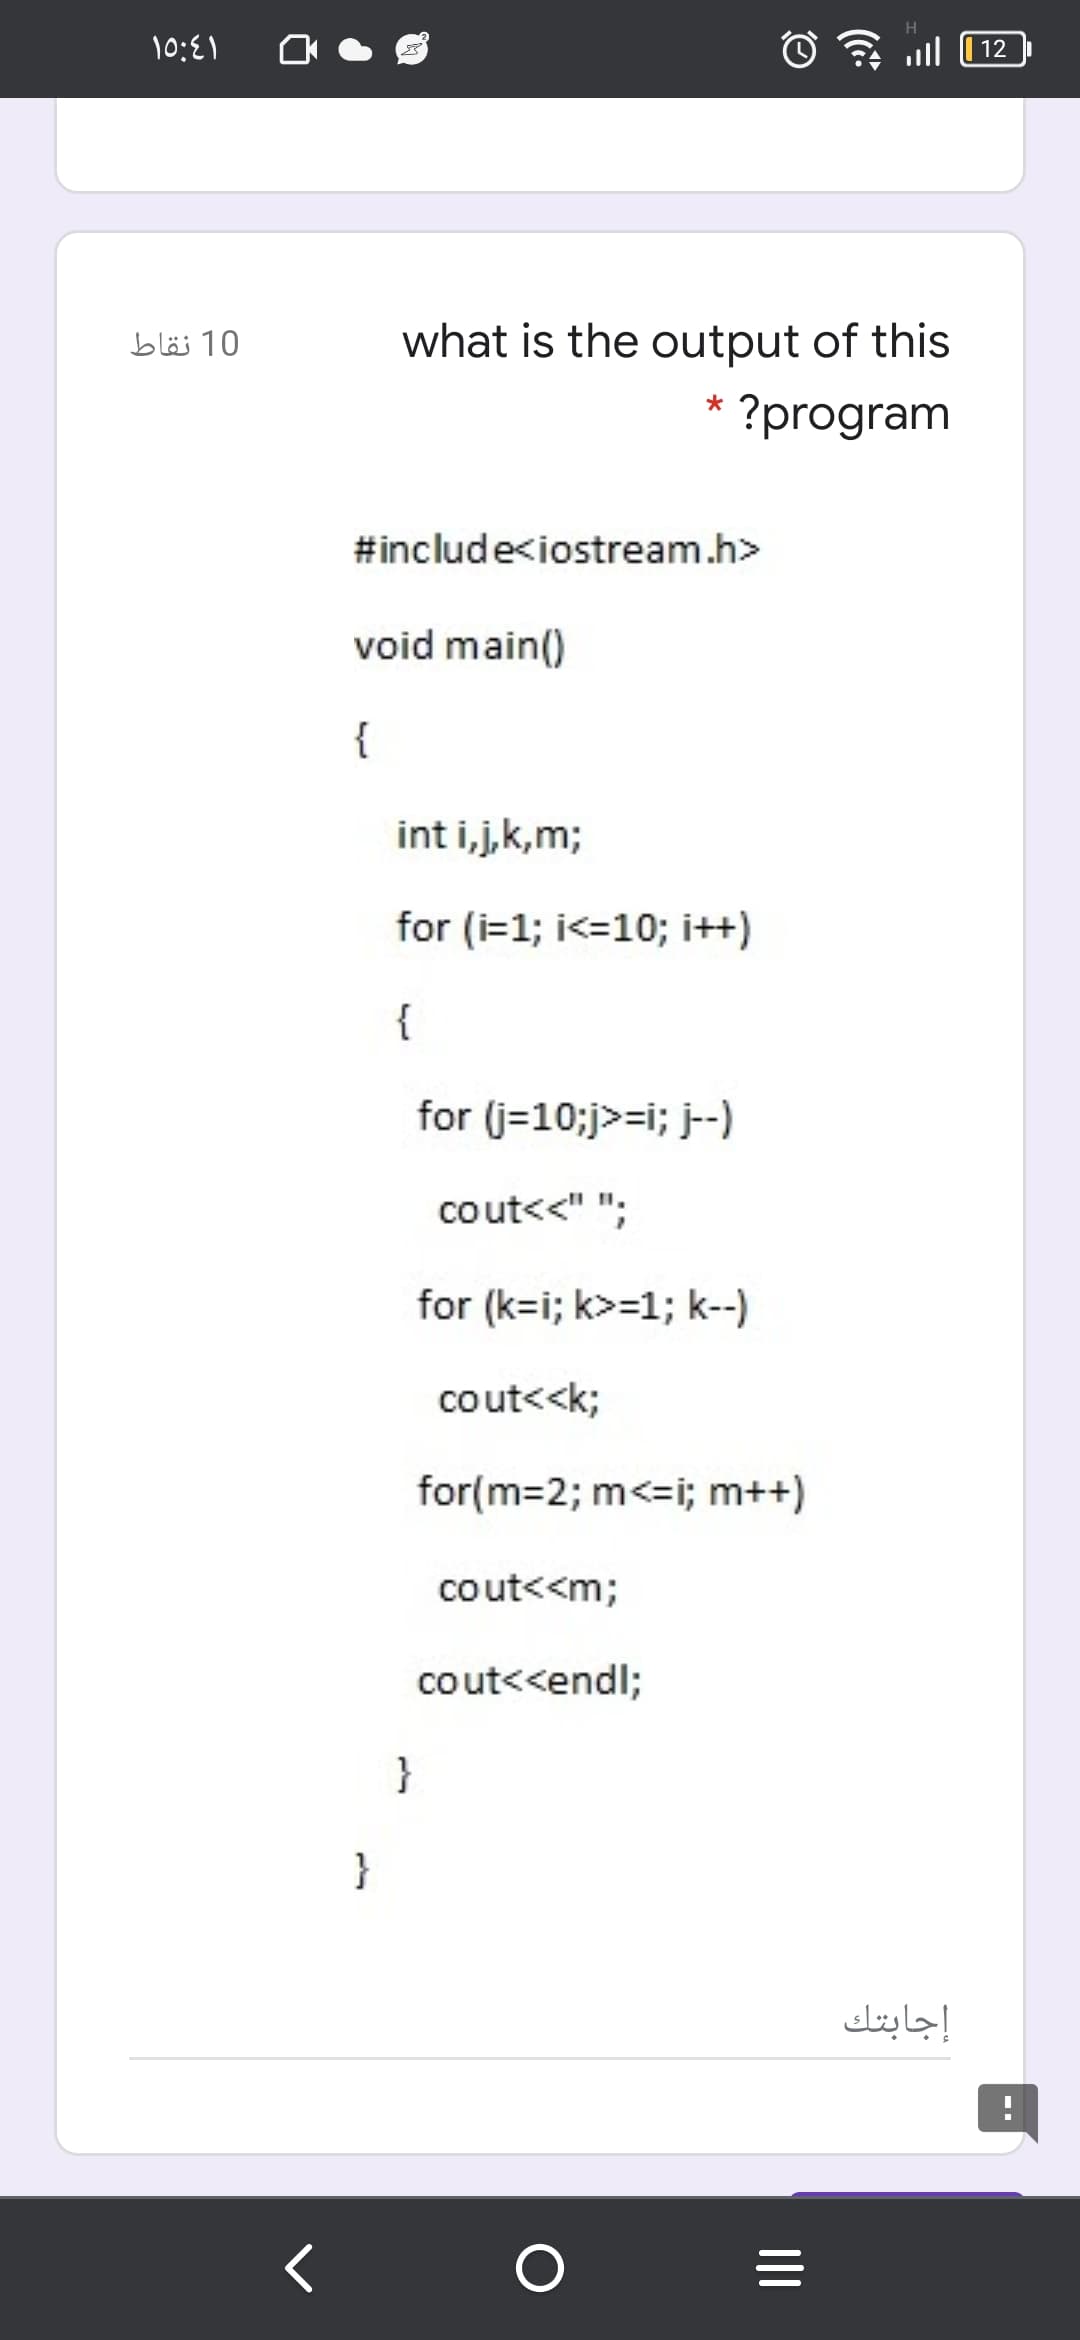 10:E1
ull
12
10 نقاط
what is the output of this
?program
#include<iostream.h>
void main()
{
int i,j,k,m;
for (i=1; i<=10; i++)
{
for (j=10;j>=i; j--)
cout<<" ";
for (k=i; k>=1; k--)
cout<<k;
for(m=2; m<=i; m++)
cout<<m;
cout<<endl;
}
}
إجابتك
